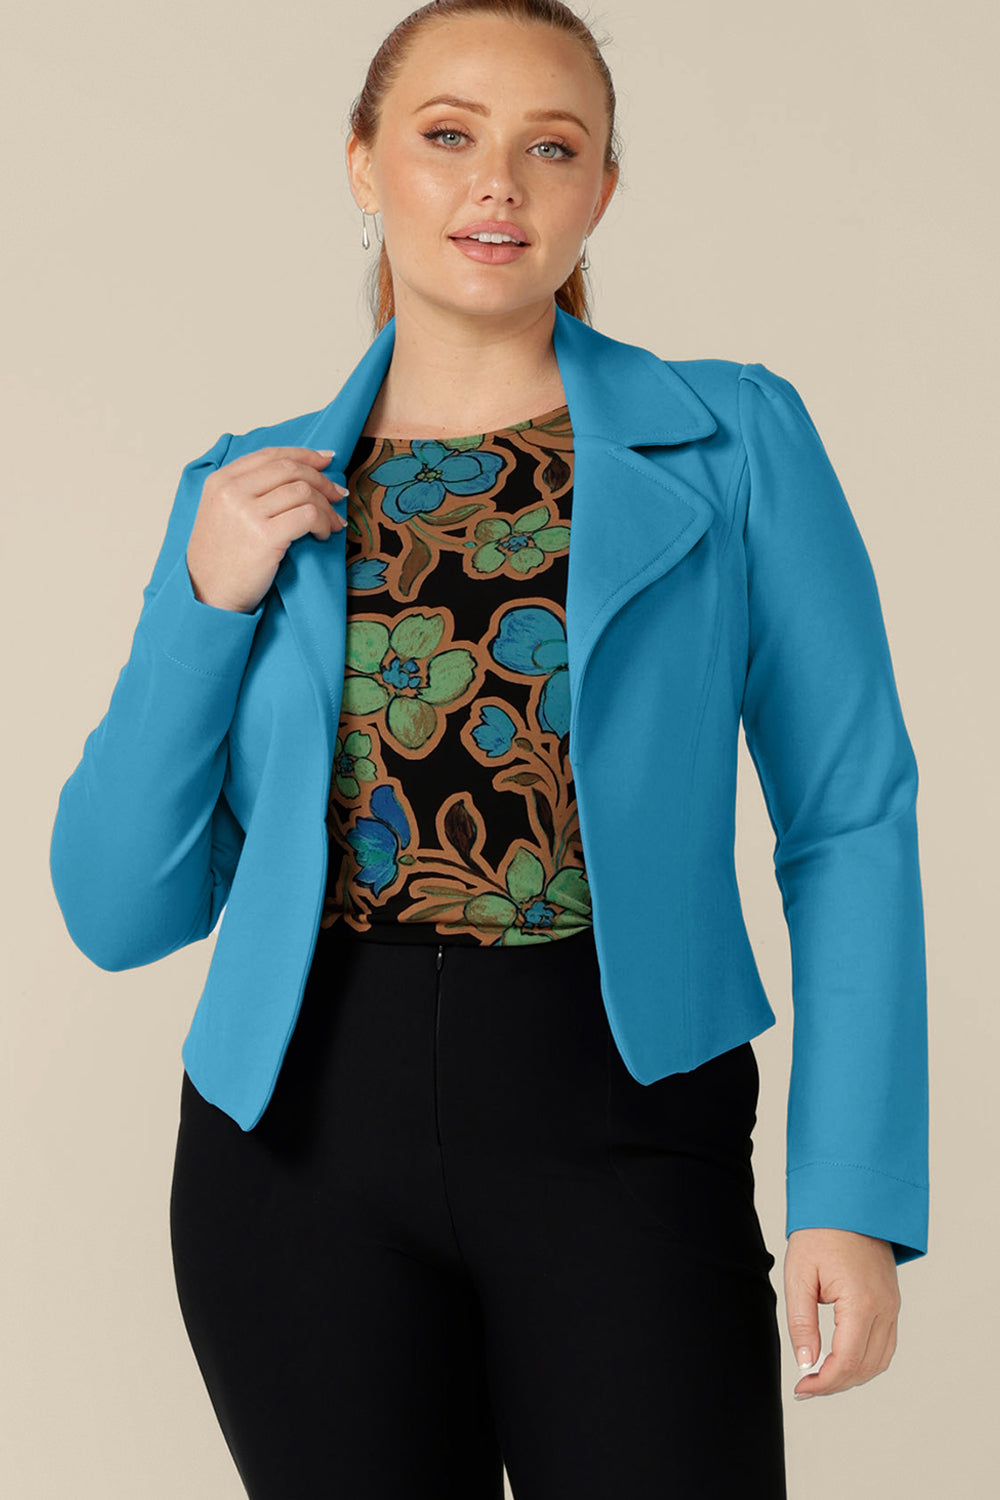 A size 12, curvy figure woman wears the Garcia Jacket in Opal blue ponte fabric by Australian and New Zealand women's clothing label, L&F. Featuring collar and notch lapels and long sleeves, this open-fronted jacket is good for workwear and casual wear.